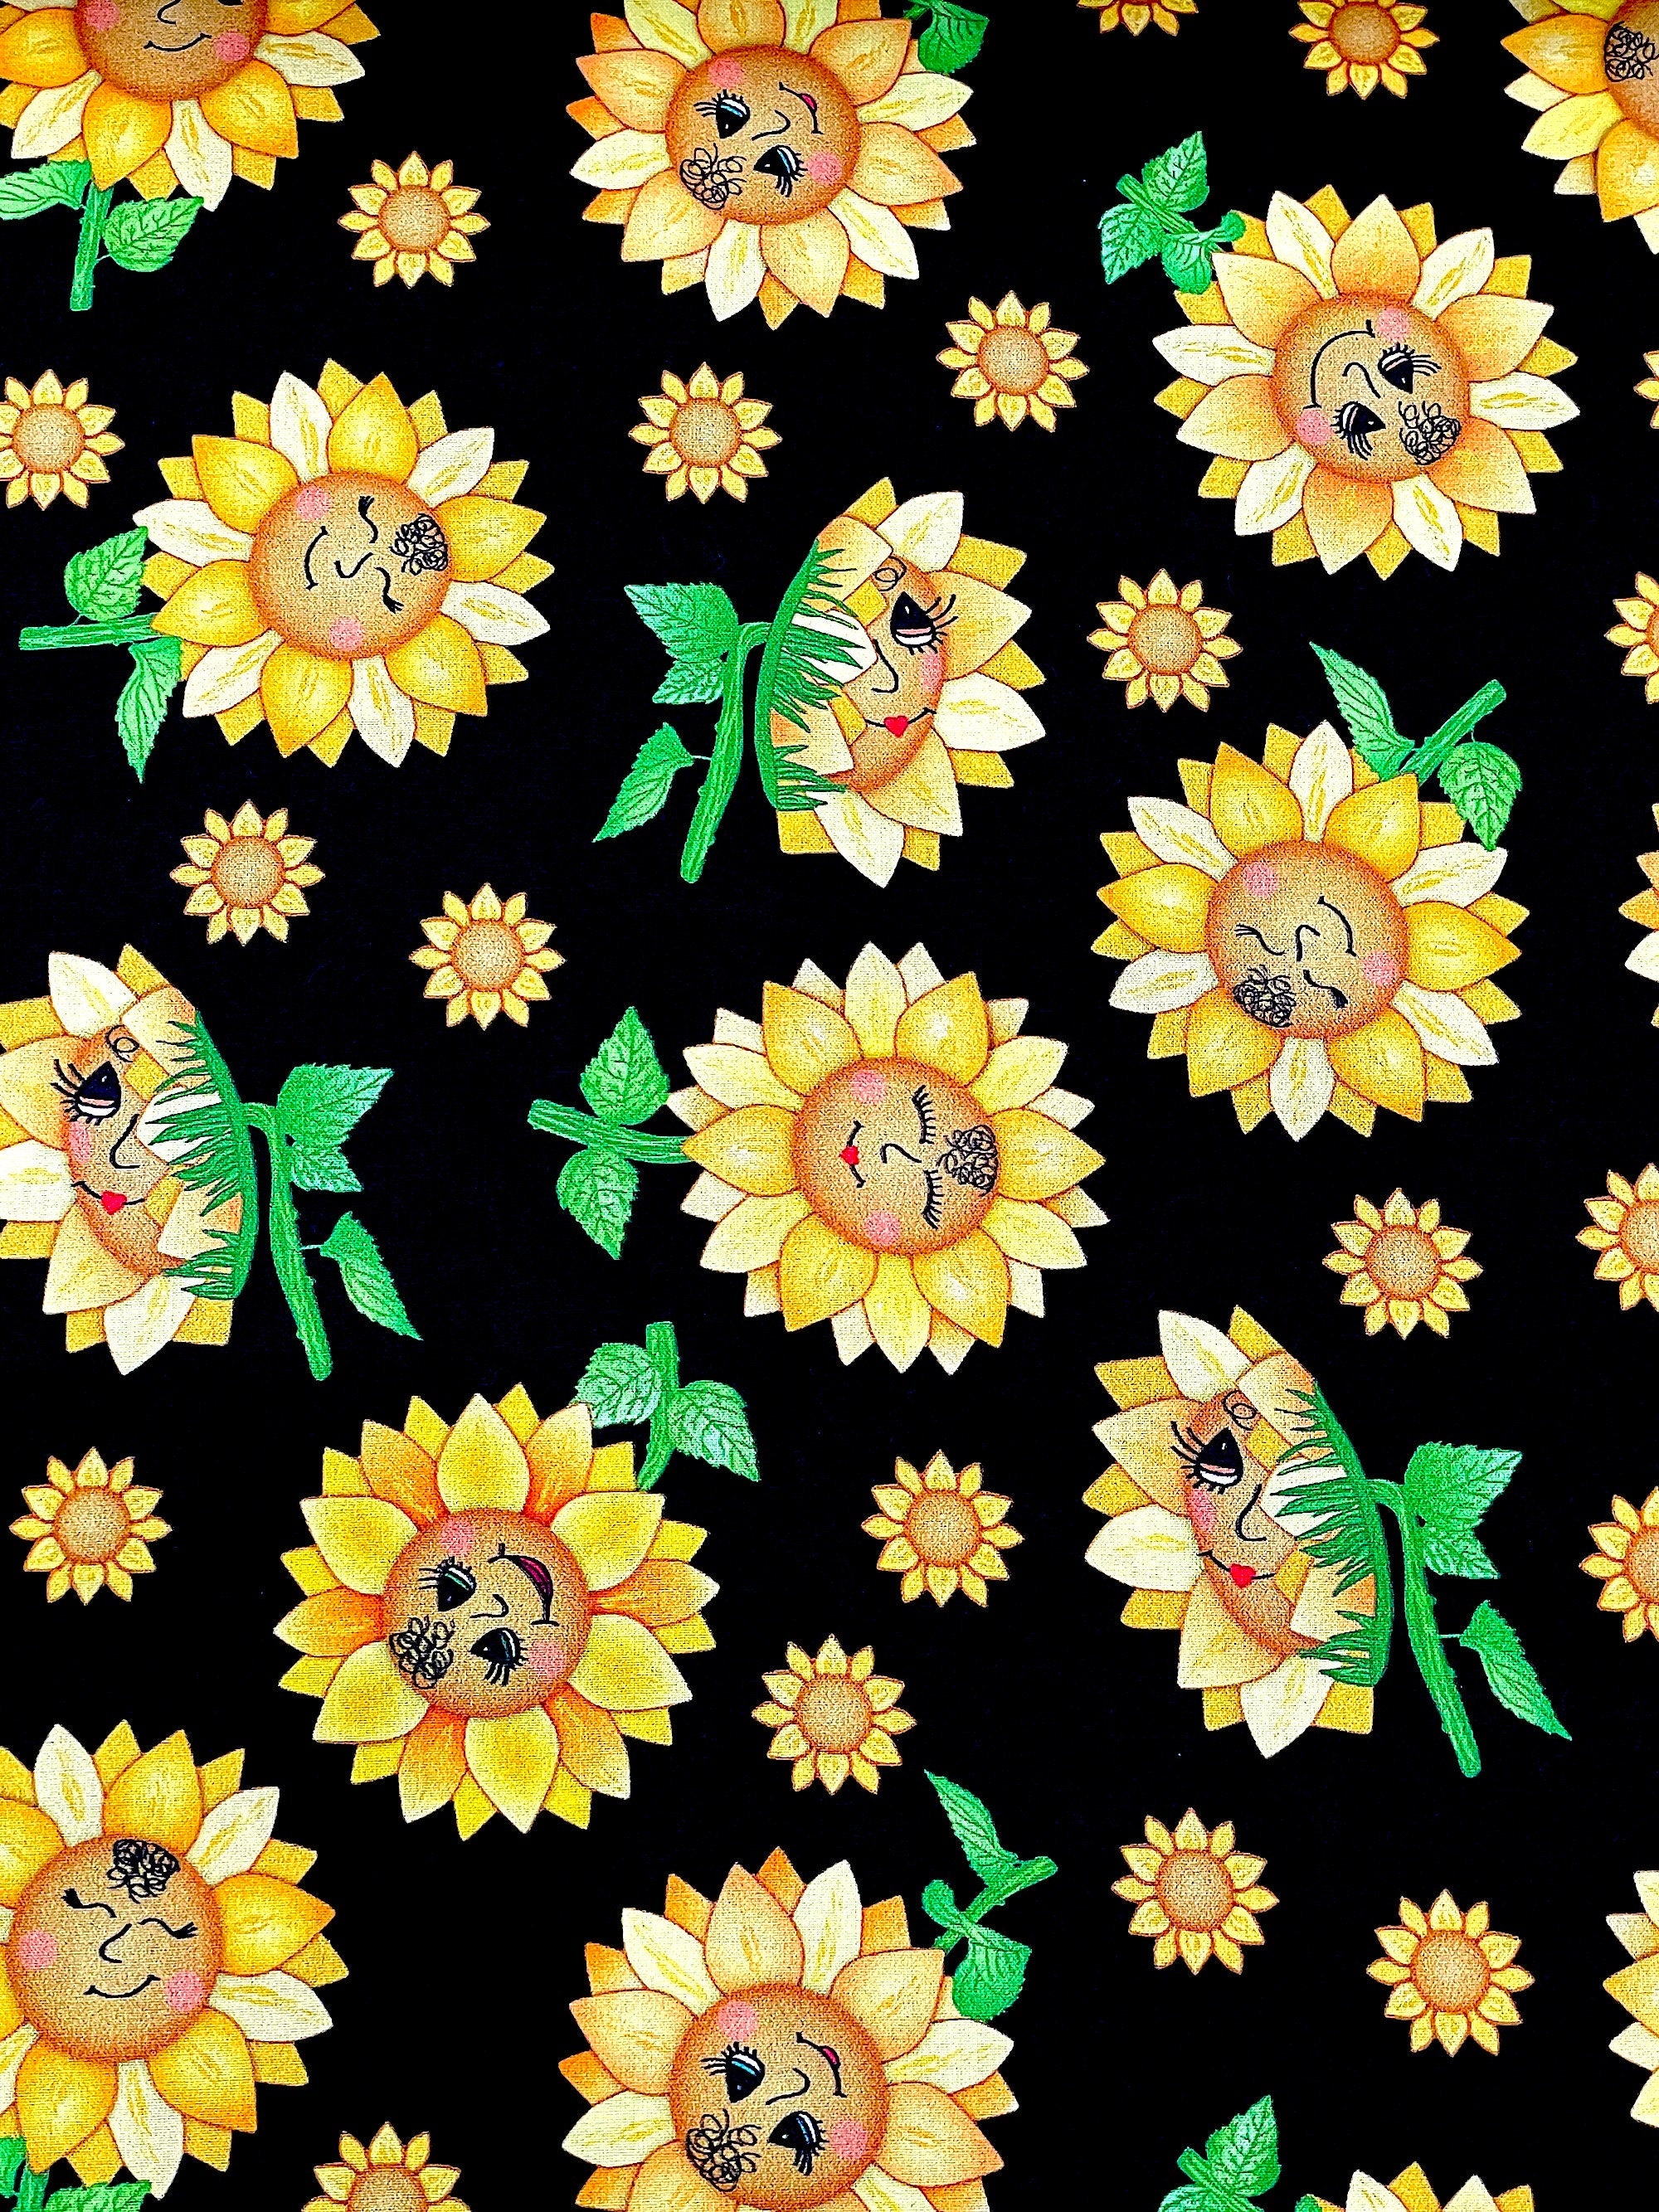 This black cotton fabric is covered with sunflowers with faces. This fabric is called Funflowers.